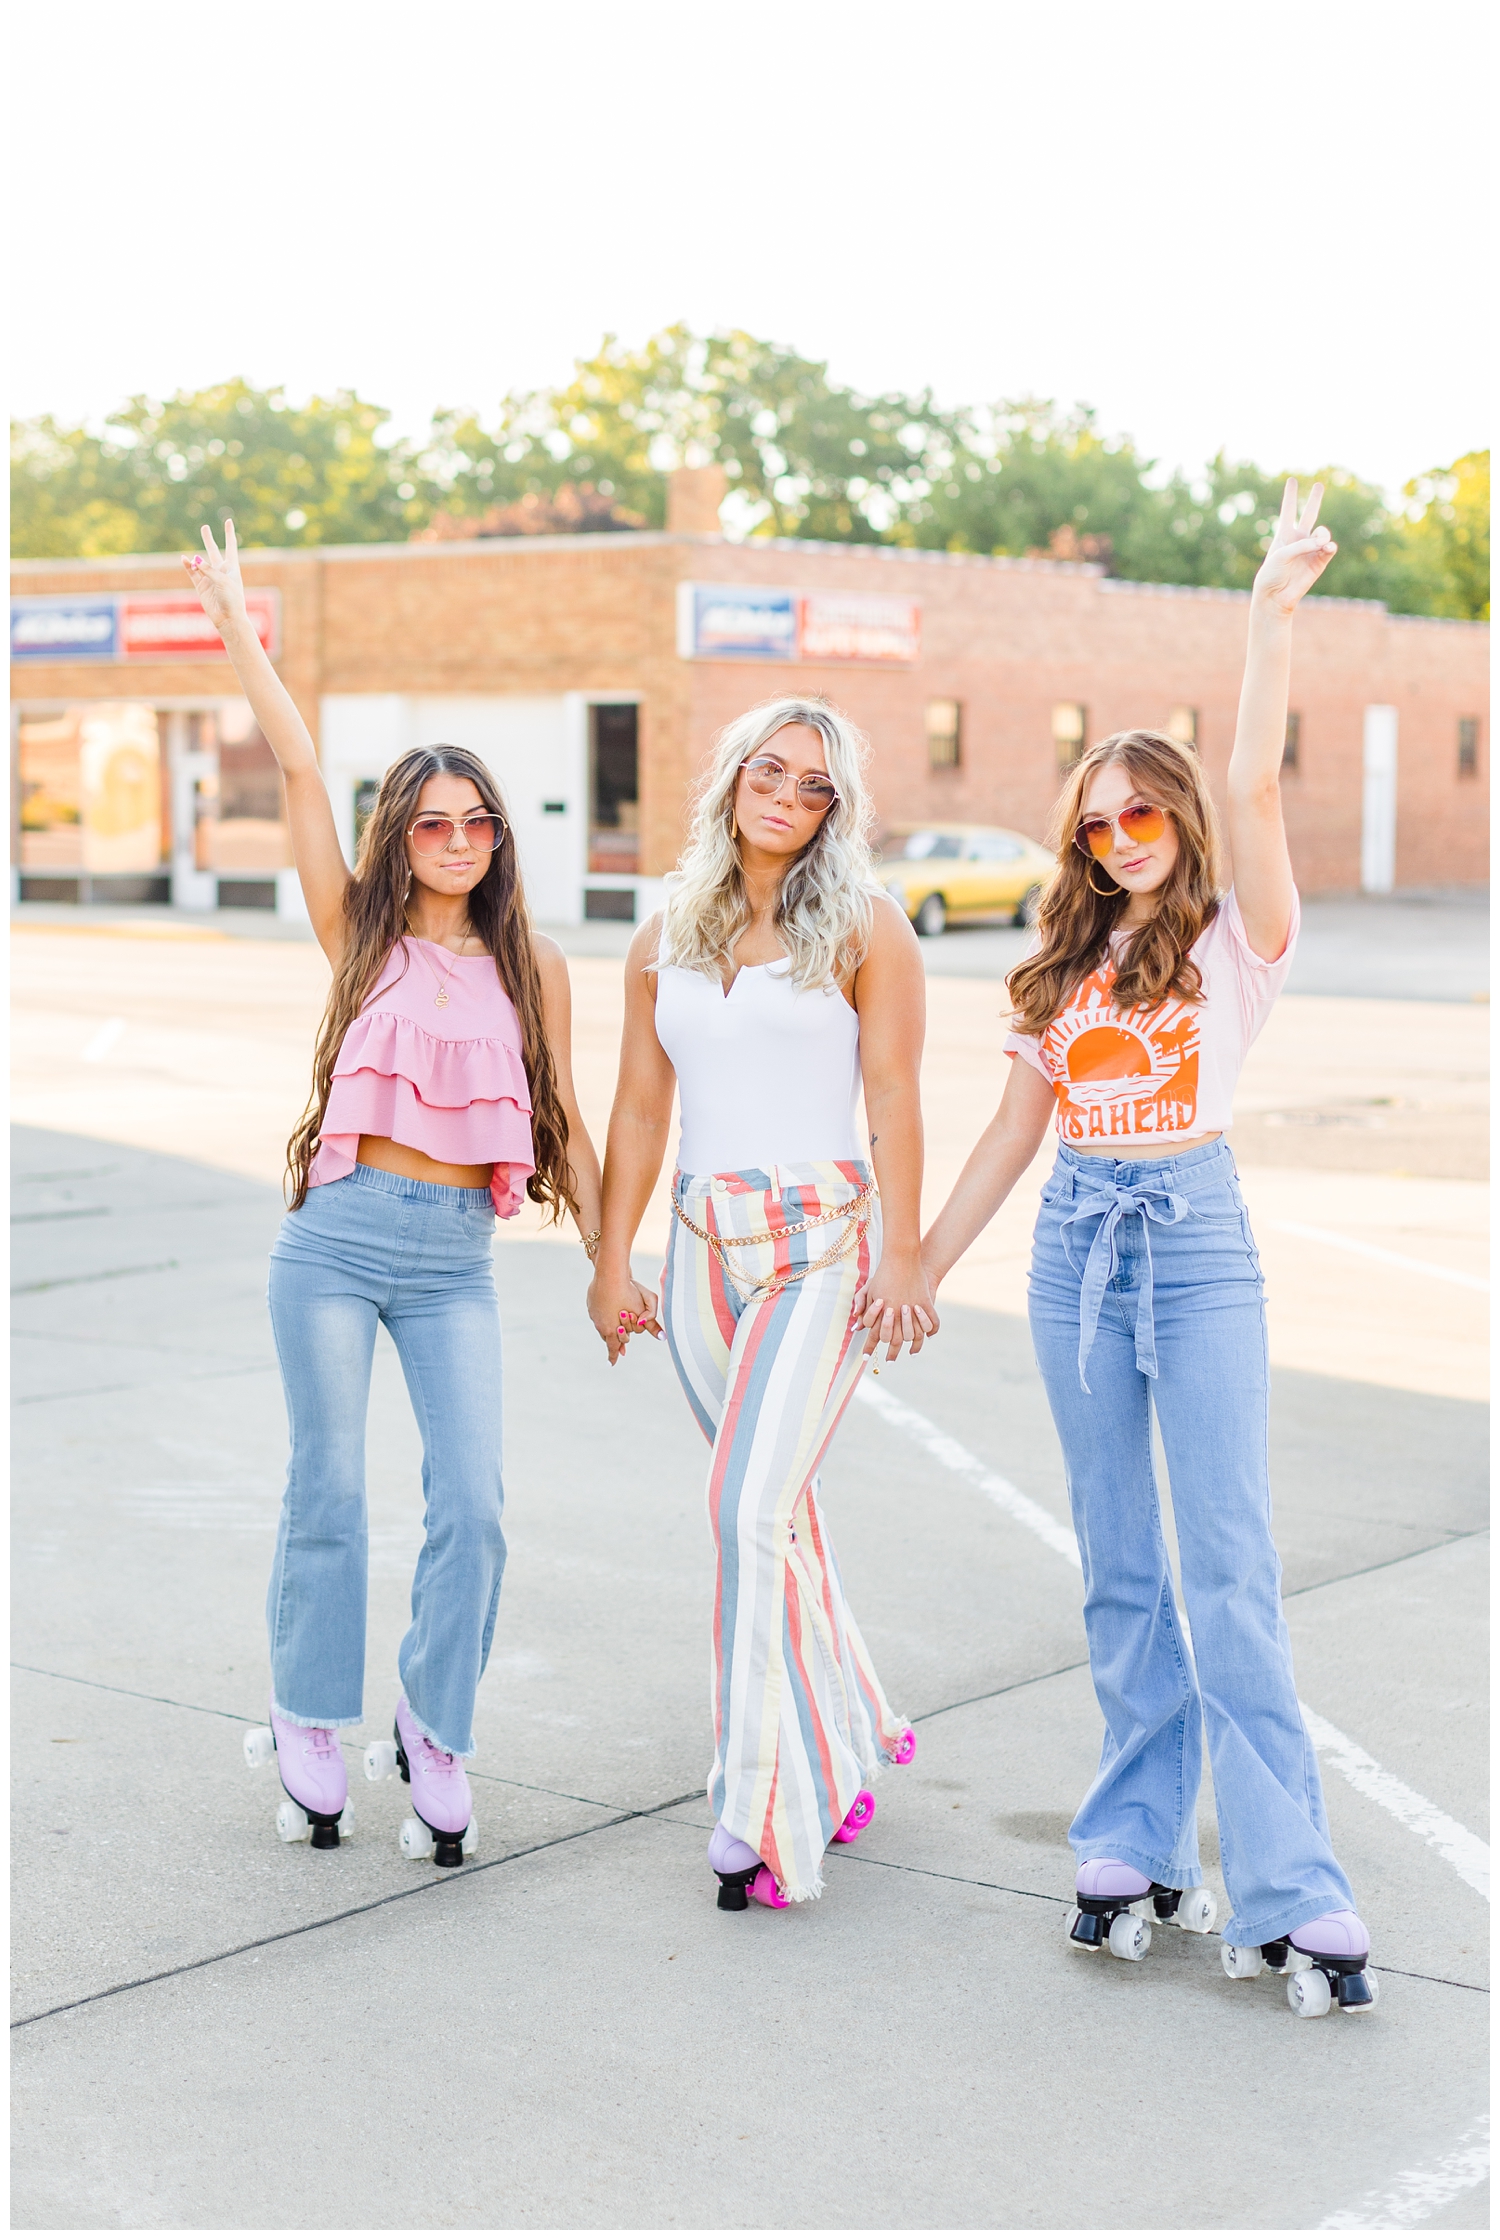 Olivia, Shelby and Savannah stand in a desolate parking lot holding peace signs dressed in modern 70s style and roller skates | CB Studio 